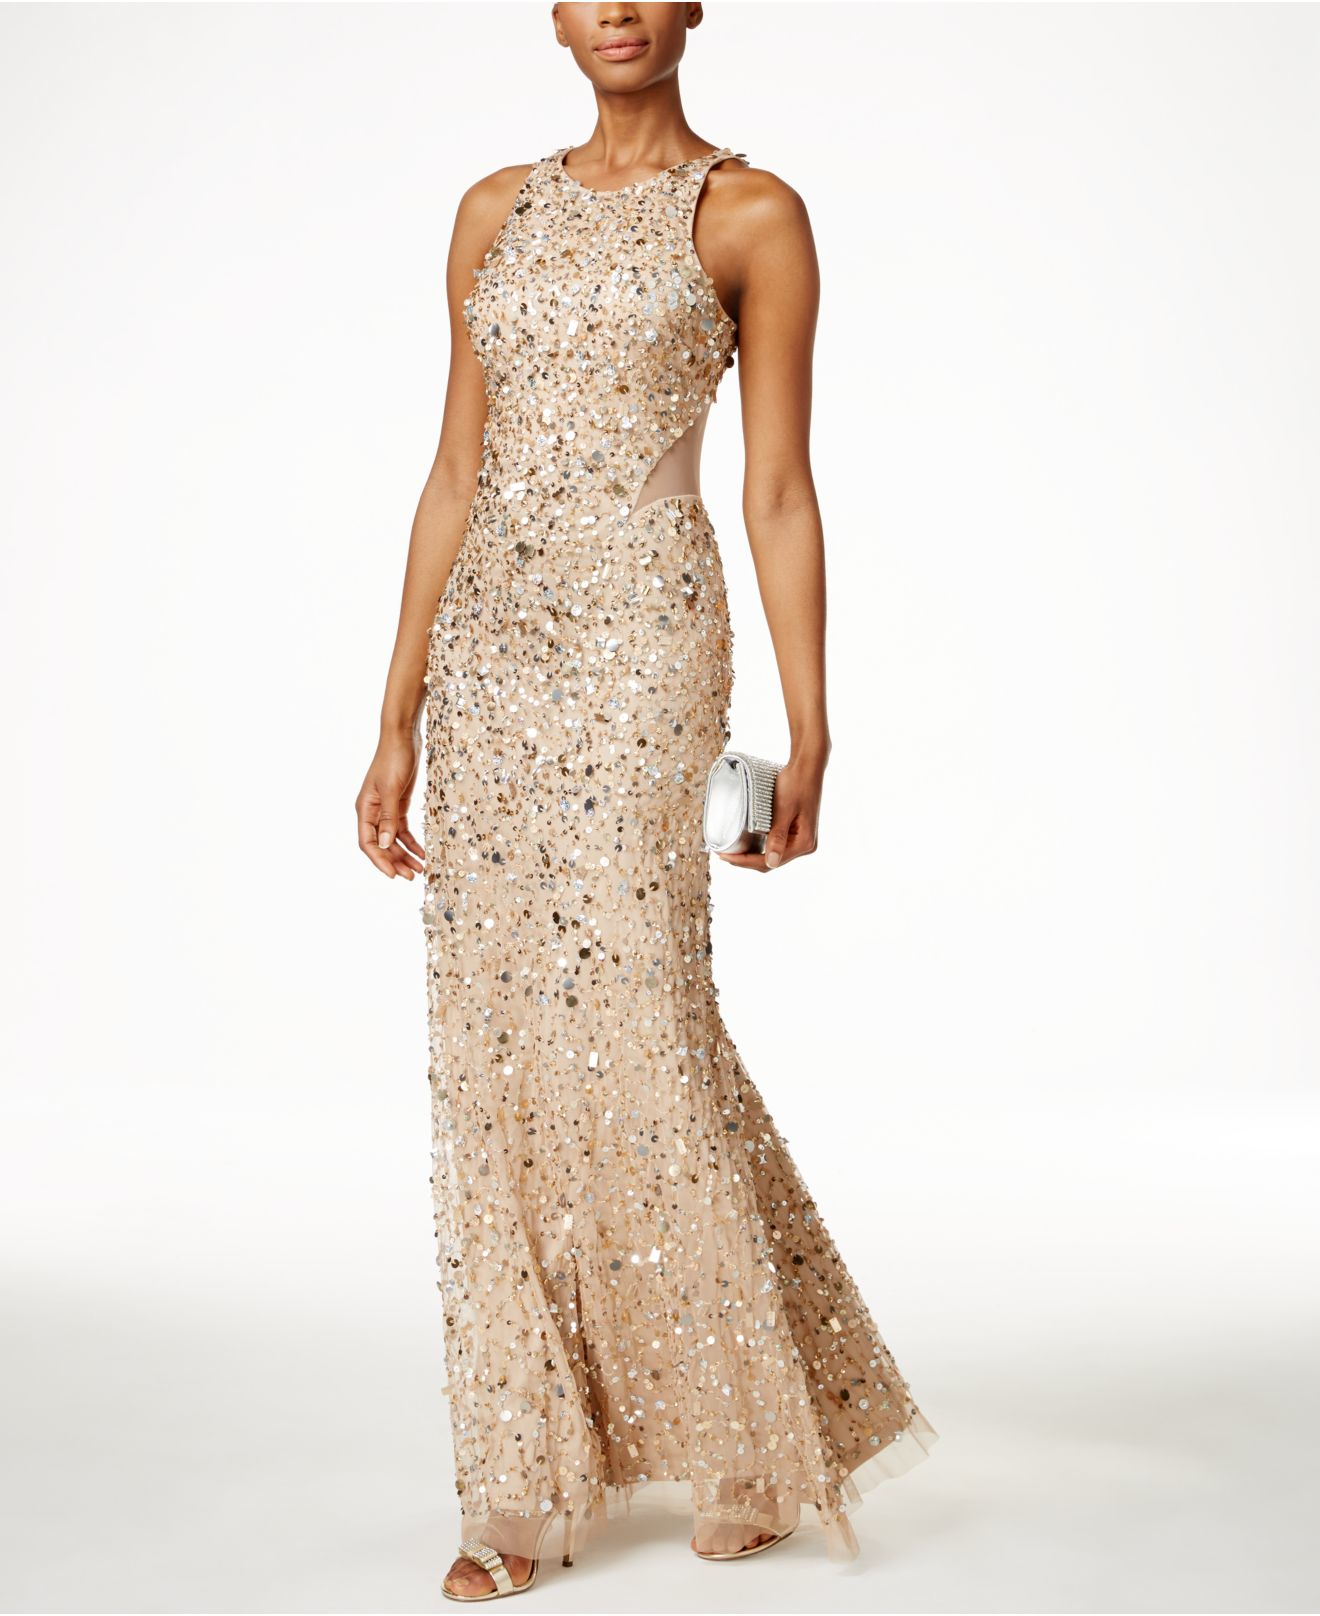 Adrianna Papell Sequined Racerback Illusion Gown in Metallic | Lyst